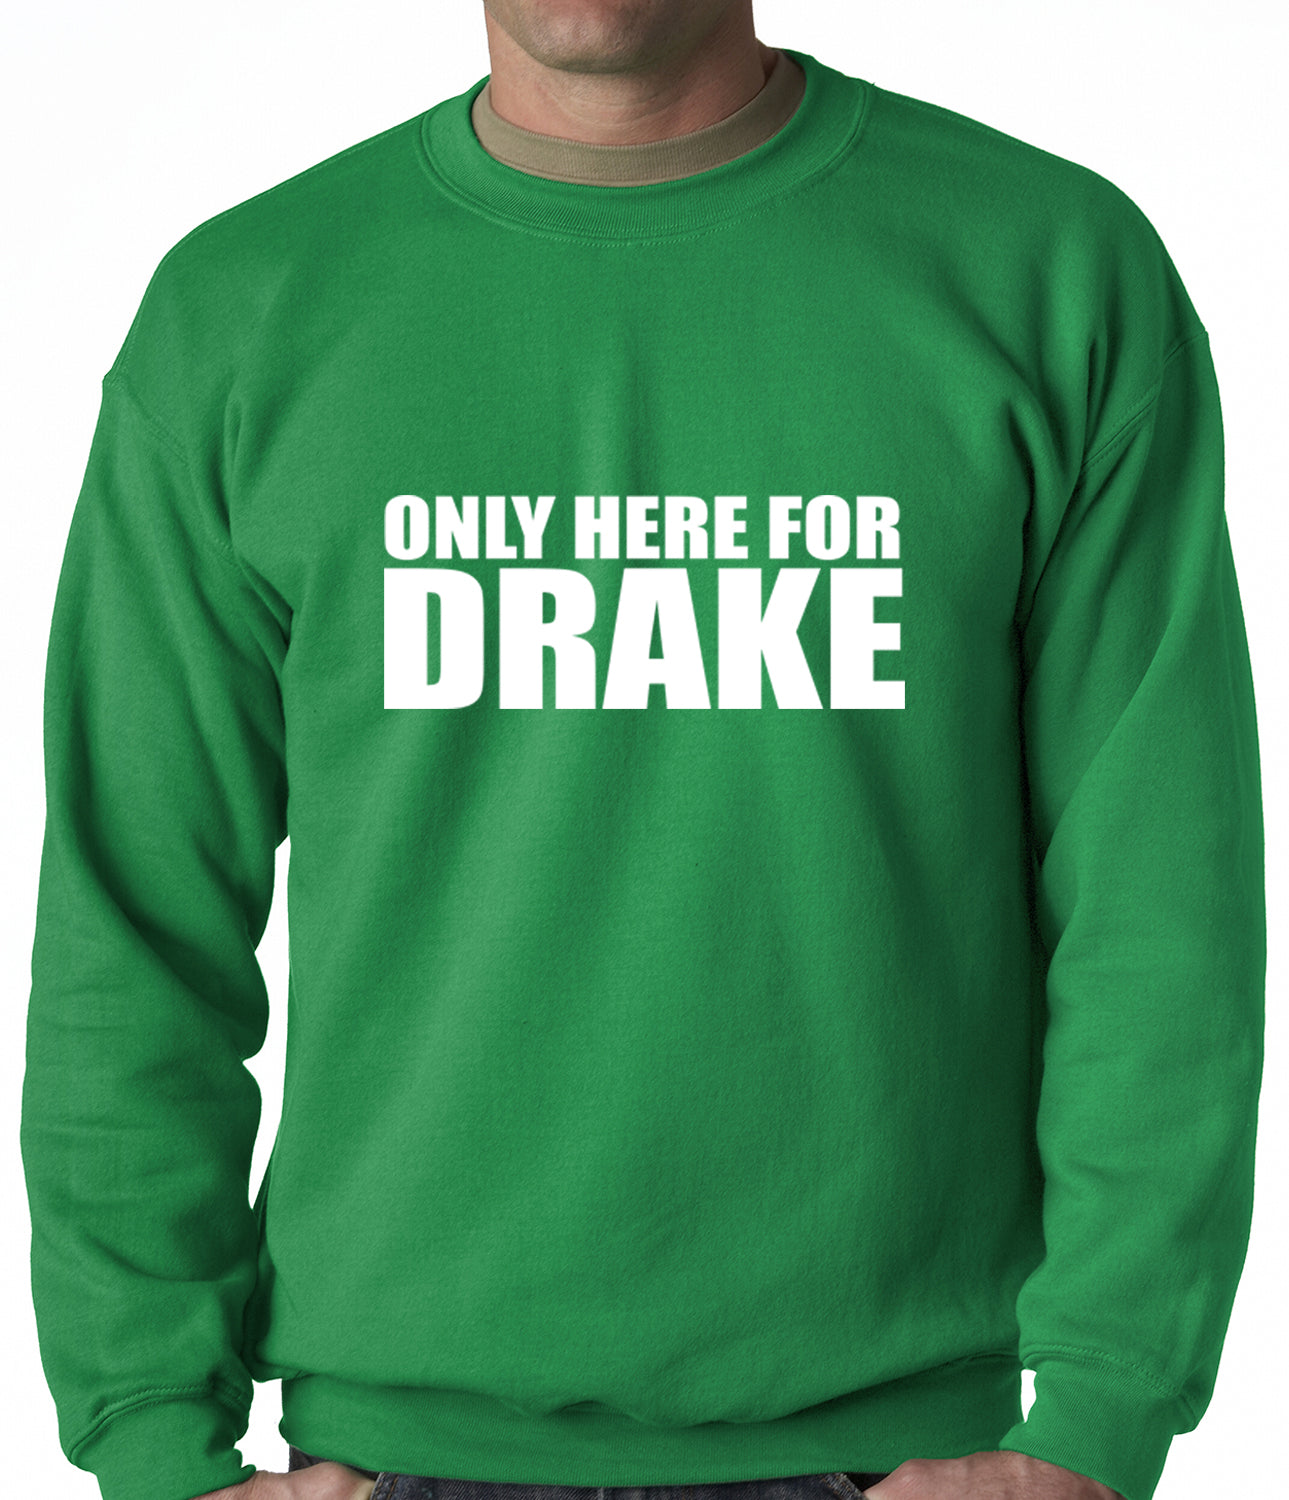 Only Here For Drake Adult Crewneck